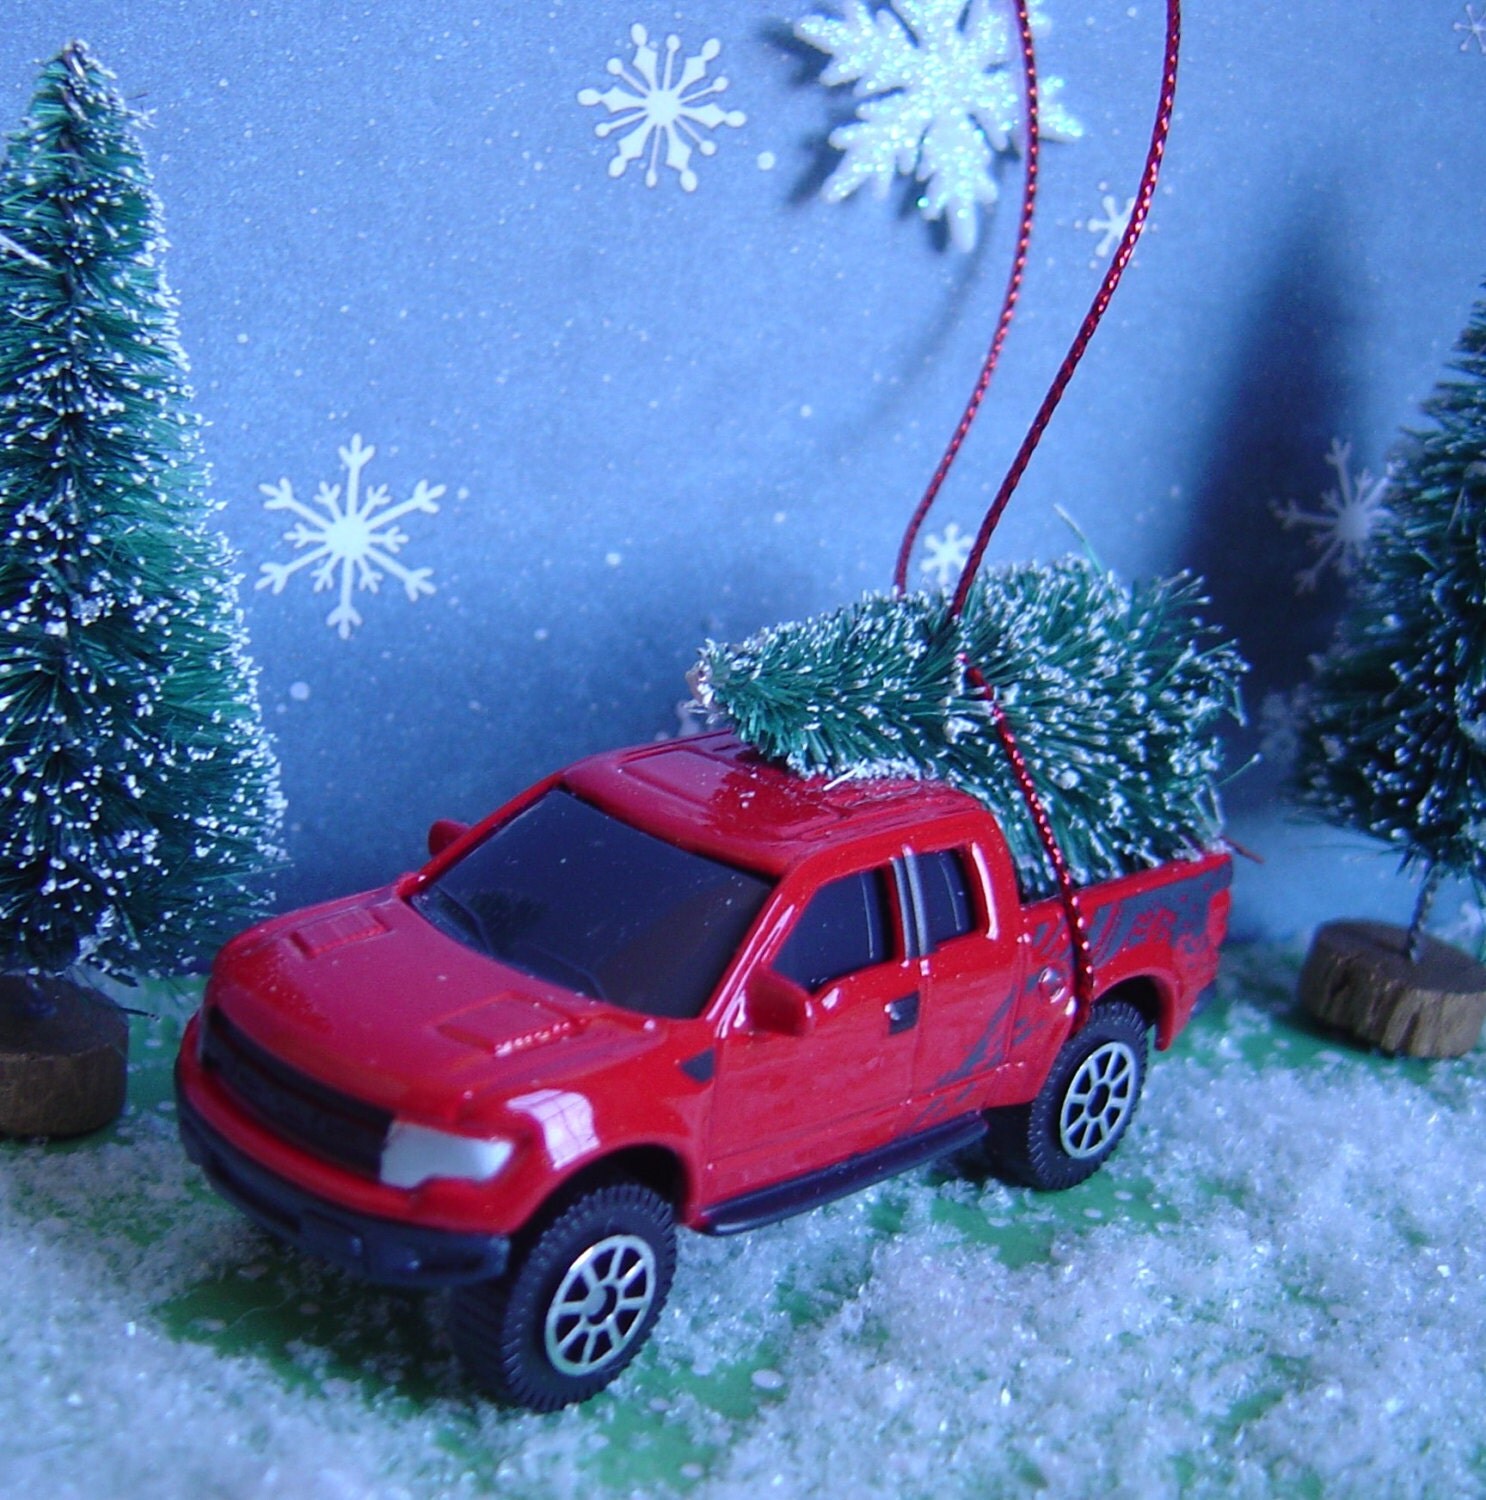 Ford F150 Truck with Christmas tree ornament